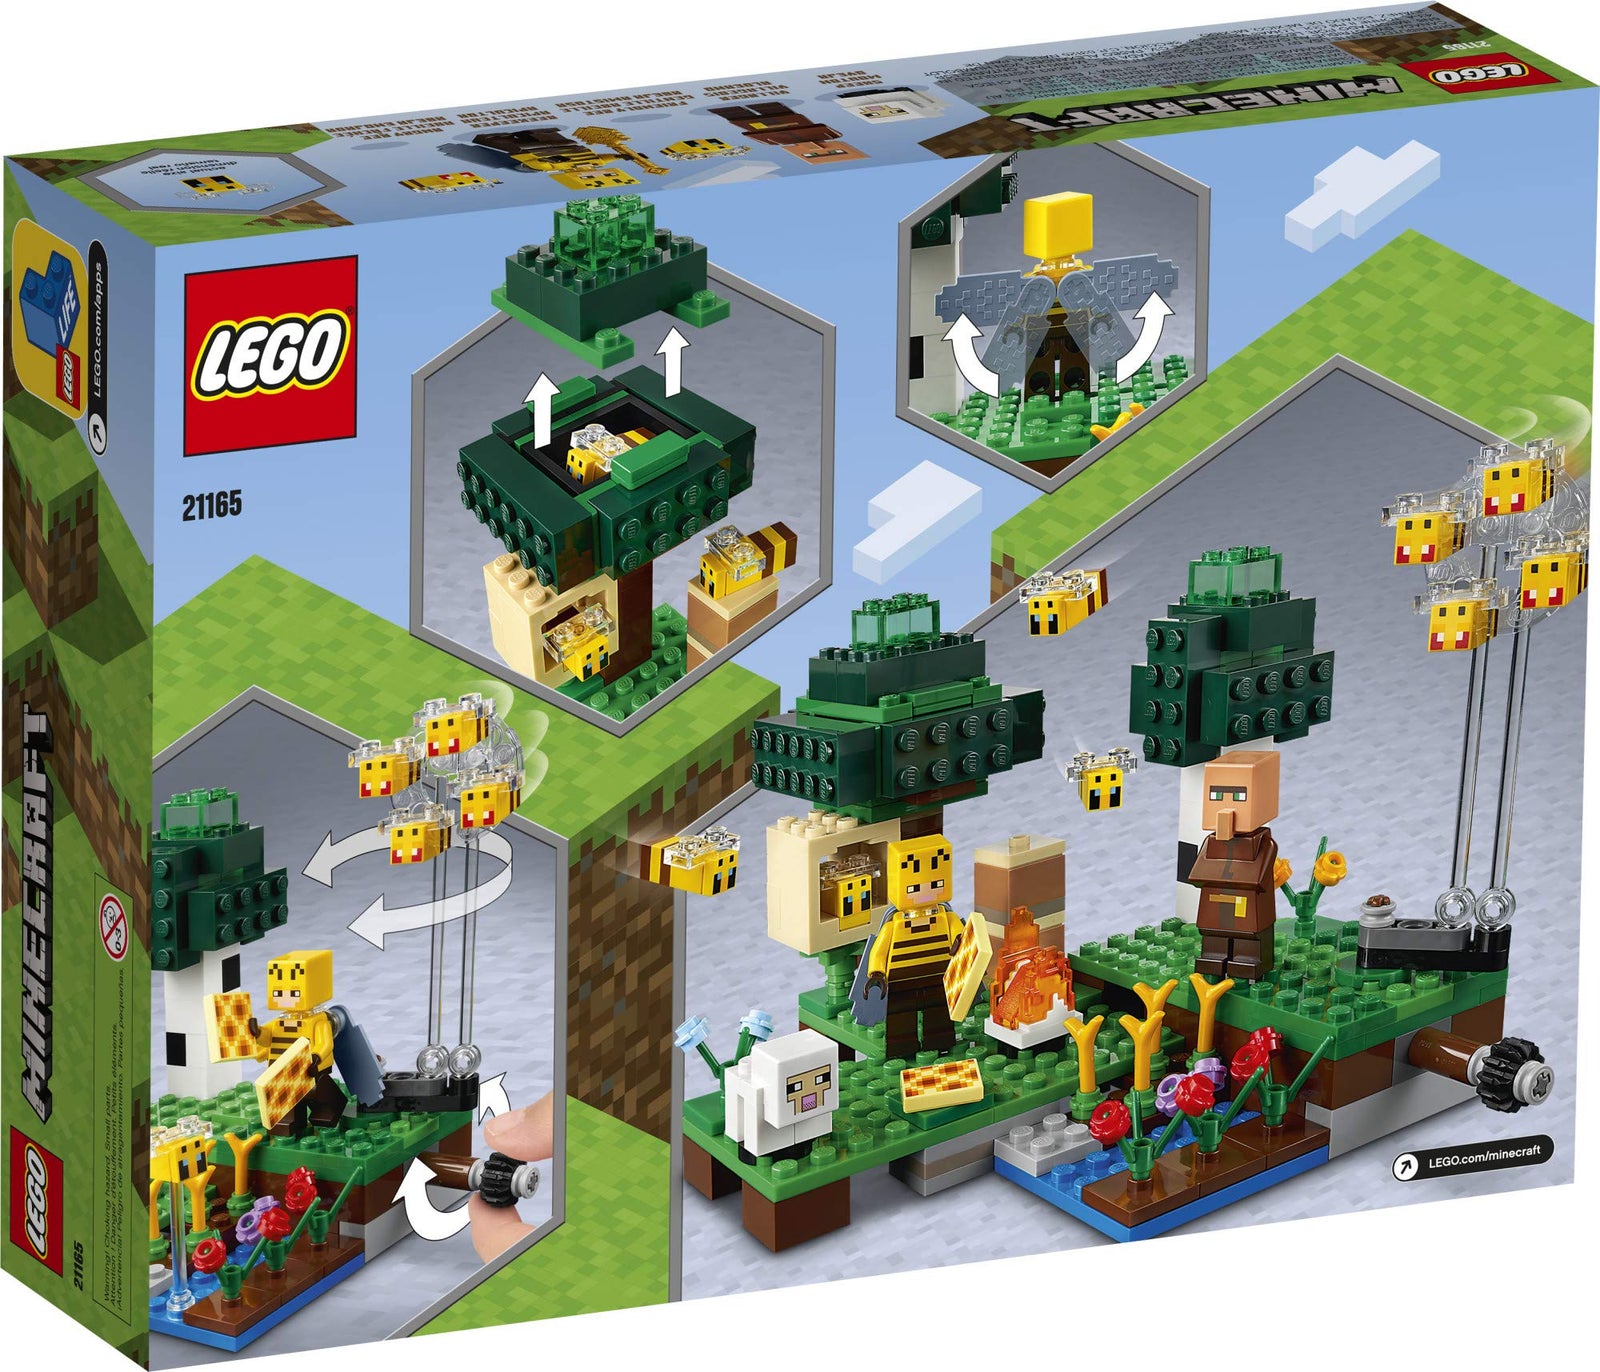 LEGO Minecraft The Bee Farm 21165 Minecraft Building Action Toy with a Beekeeper, Plus Cool Bee and Sheep Figures, New 2021 (238 Pieces)